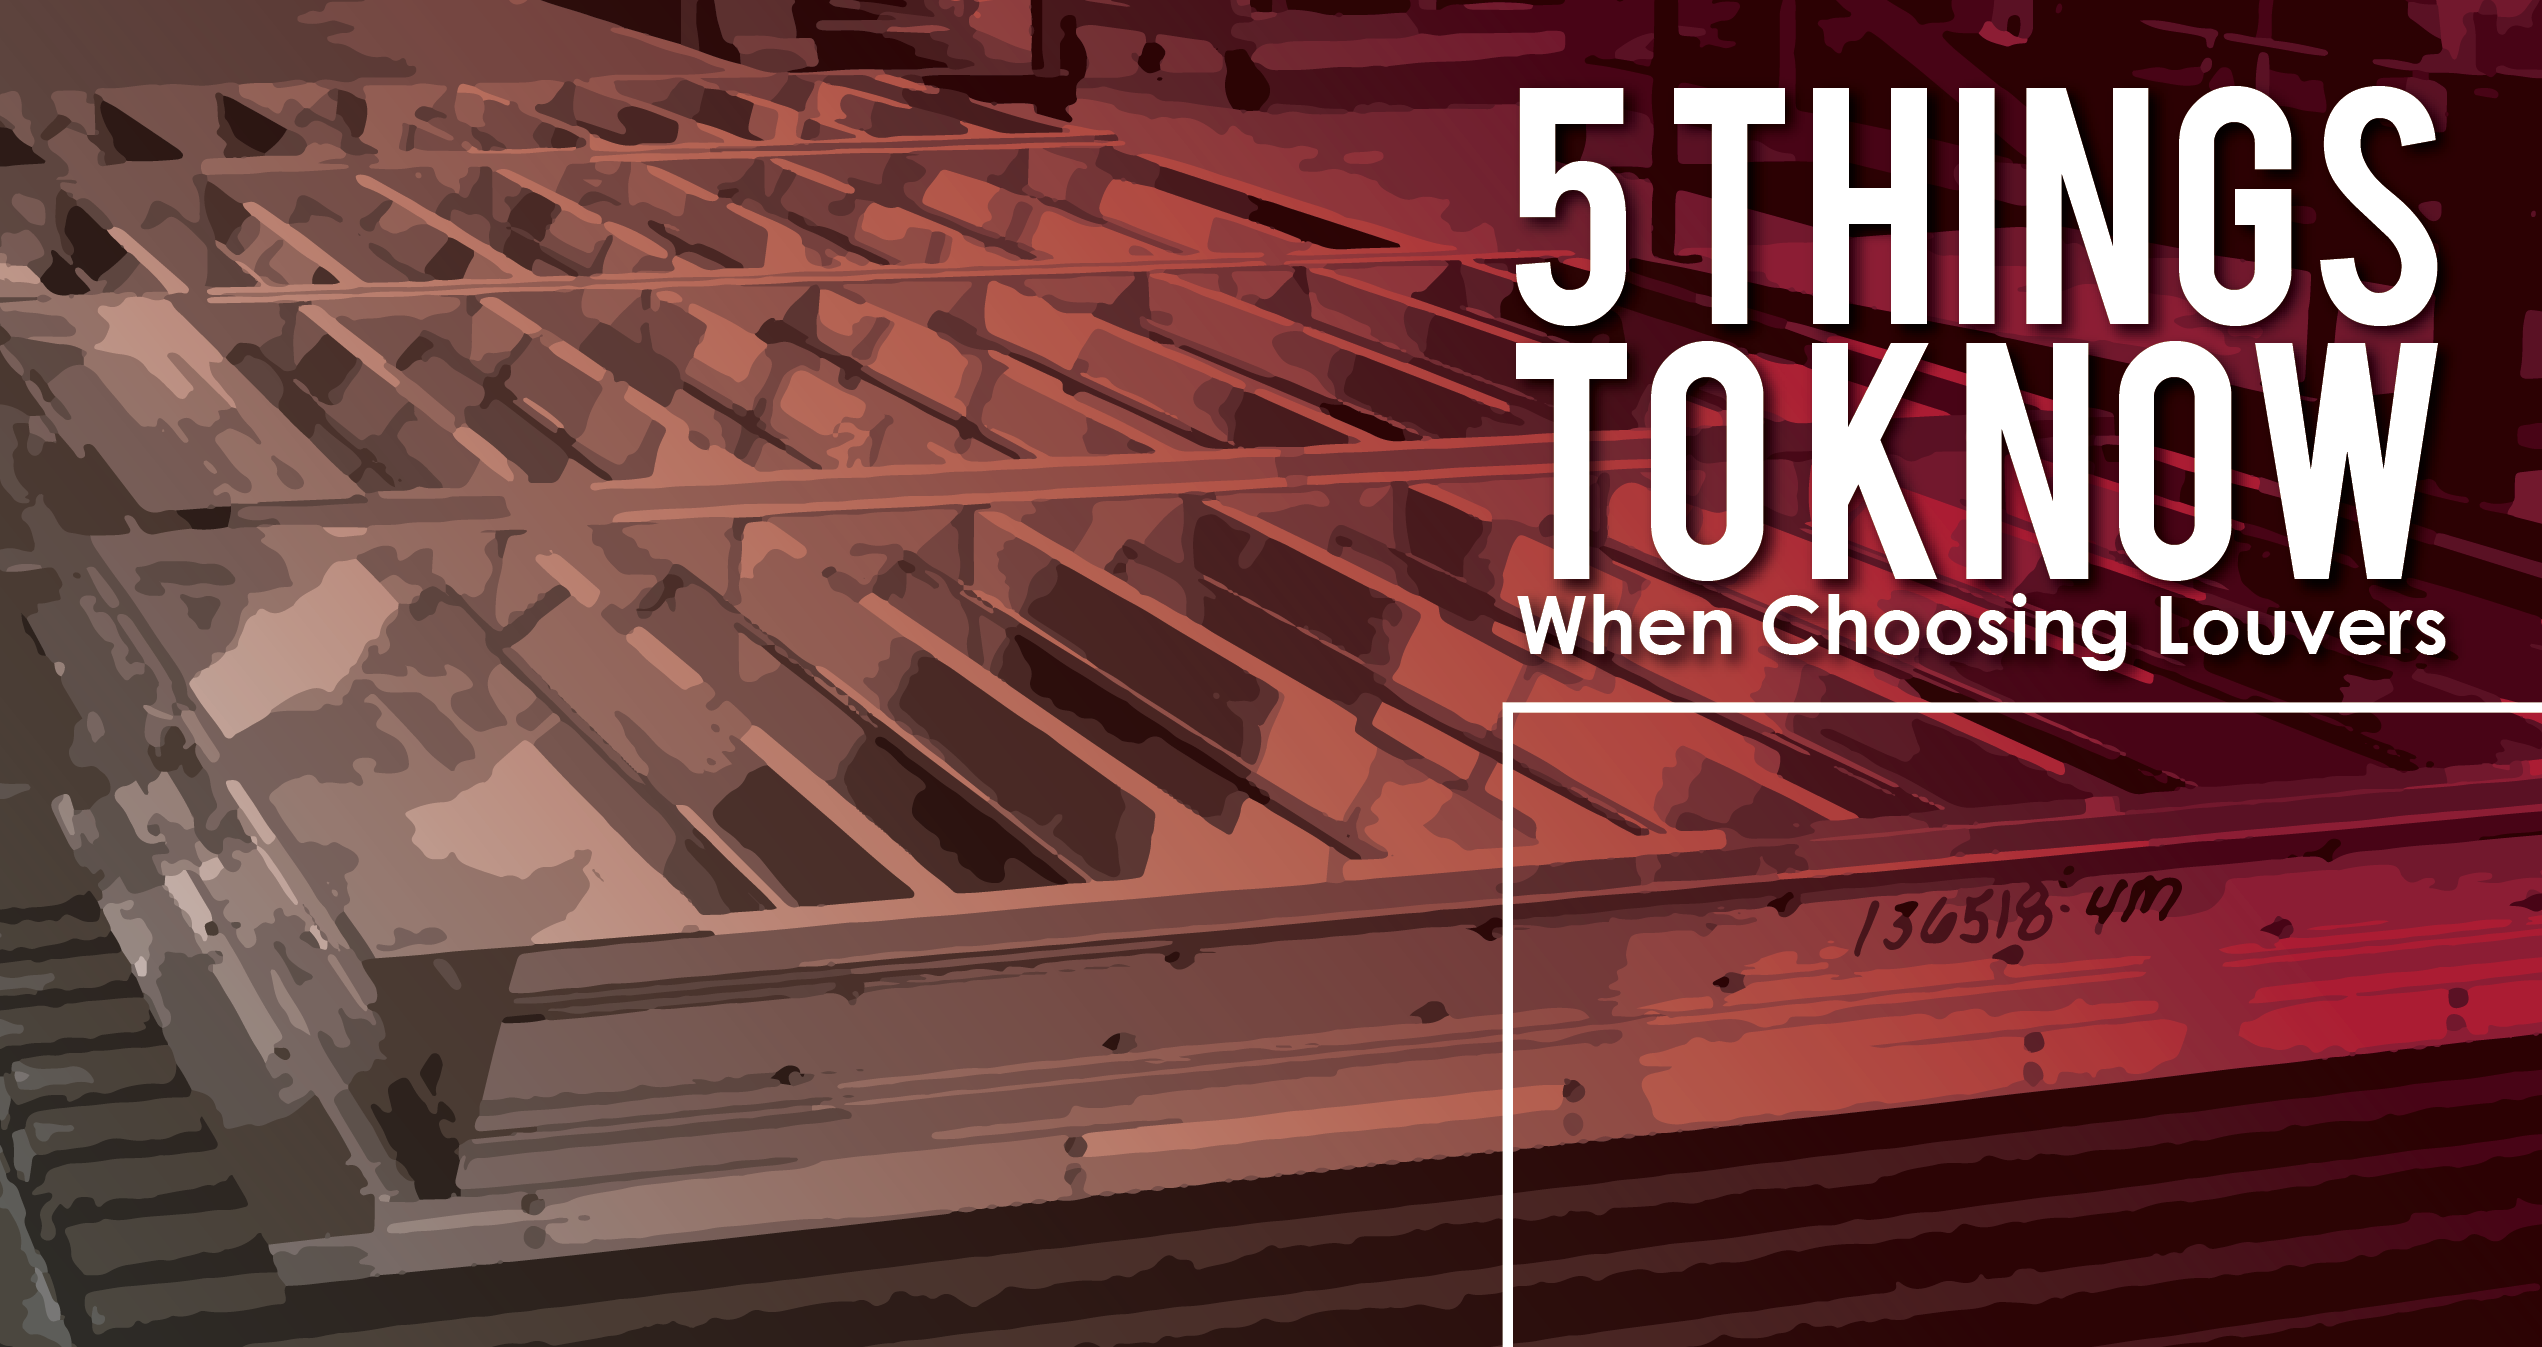 Five Things to Know When Choosing Louvers